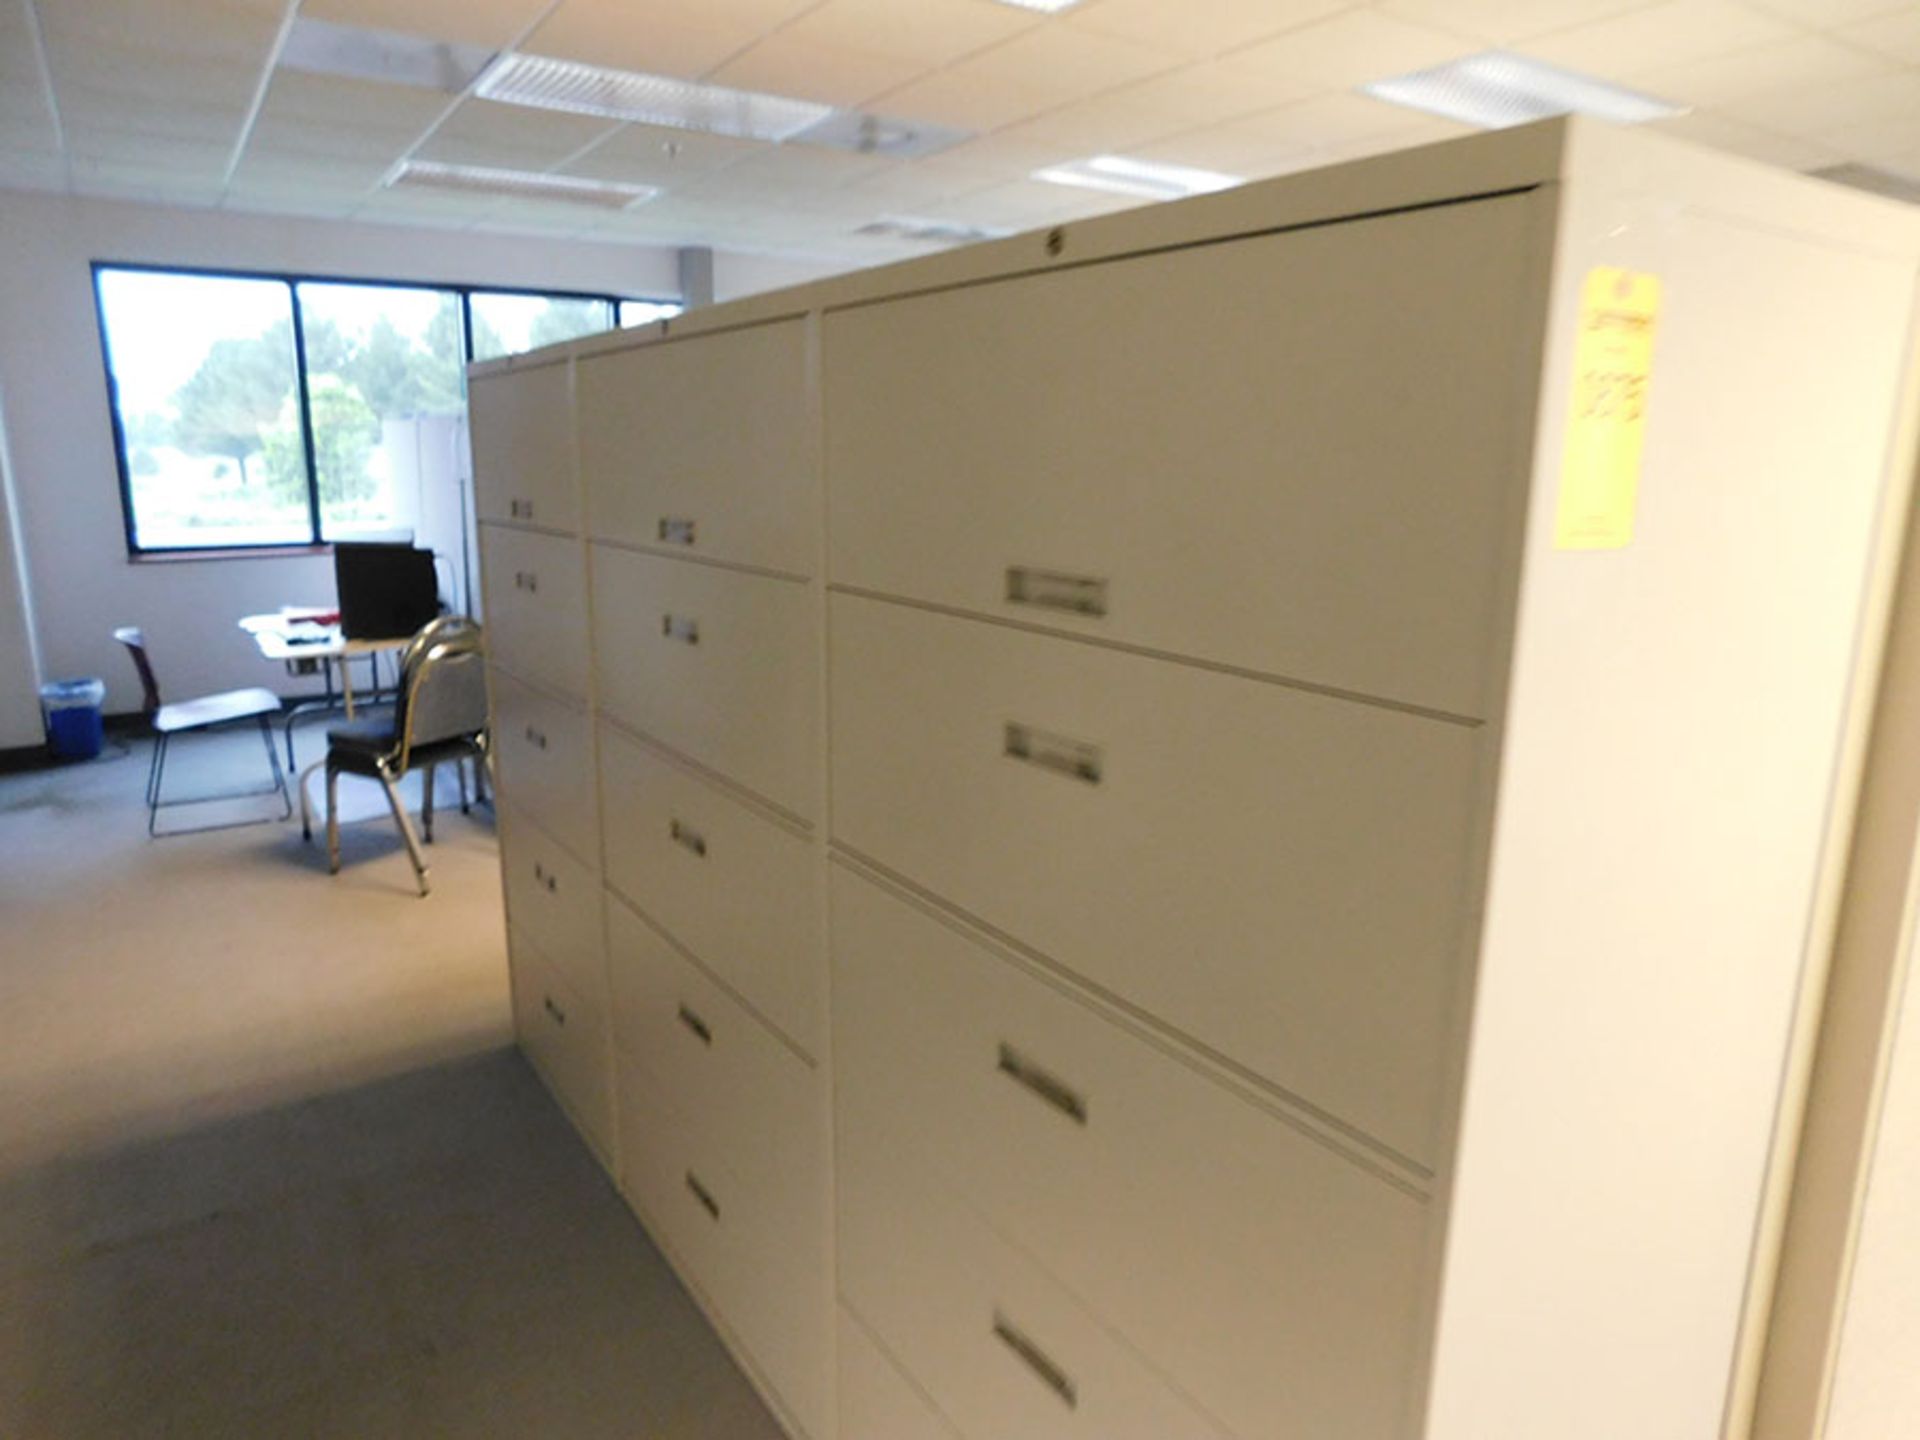 FIRST CUBICAL & SURROUNDING CABINETS